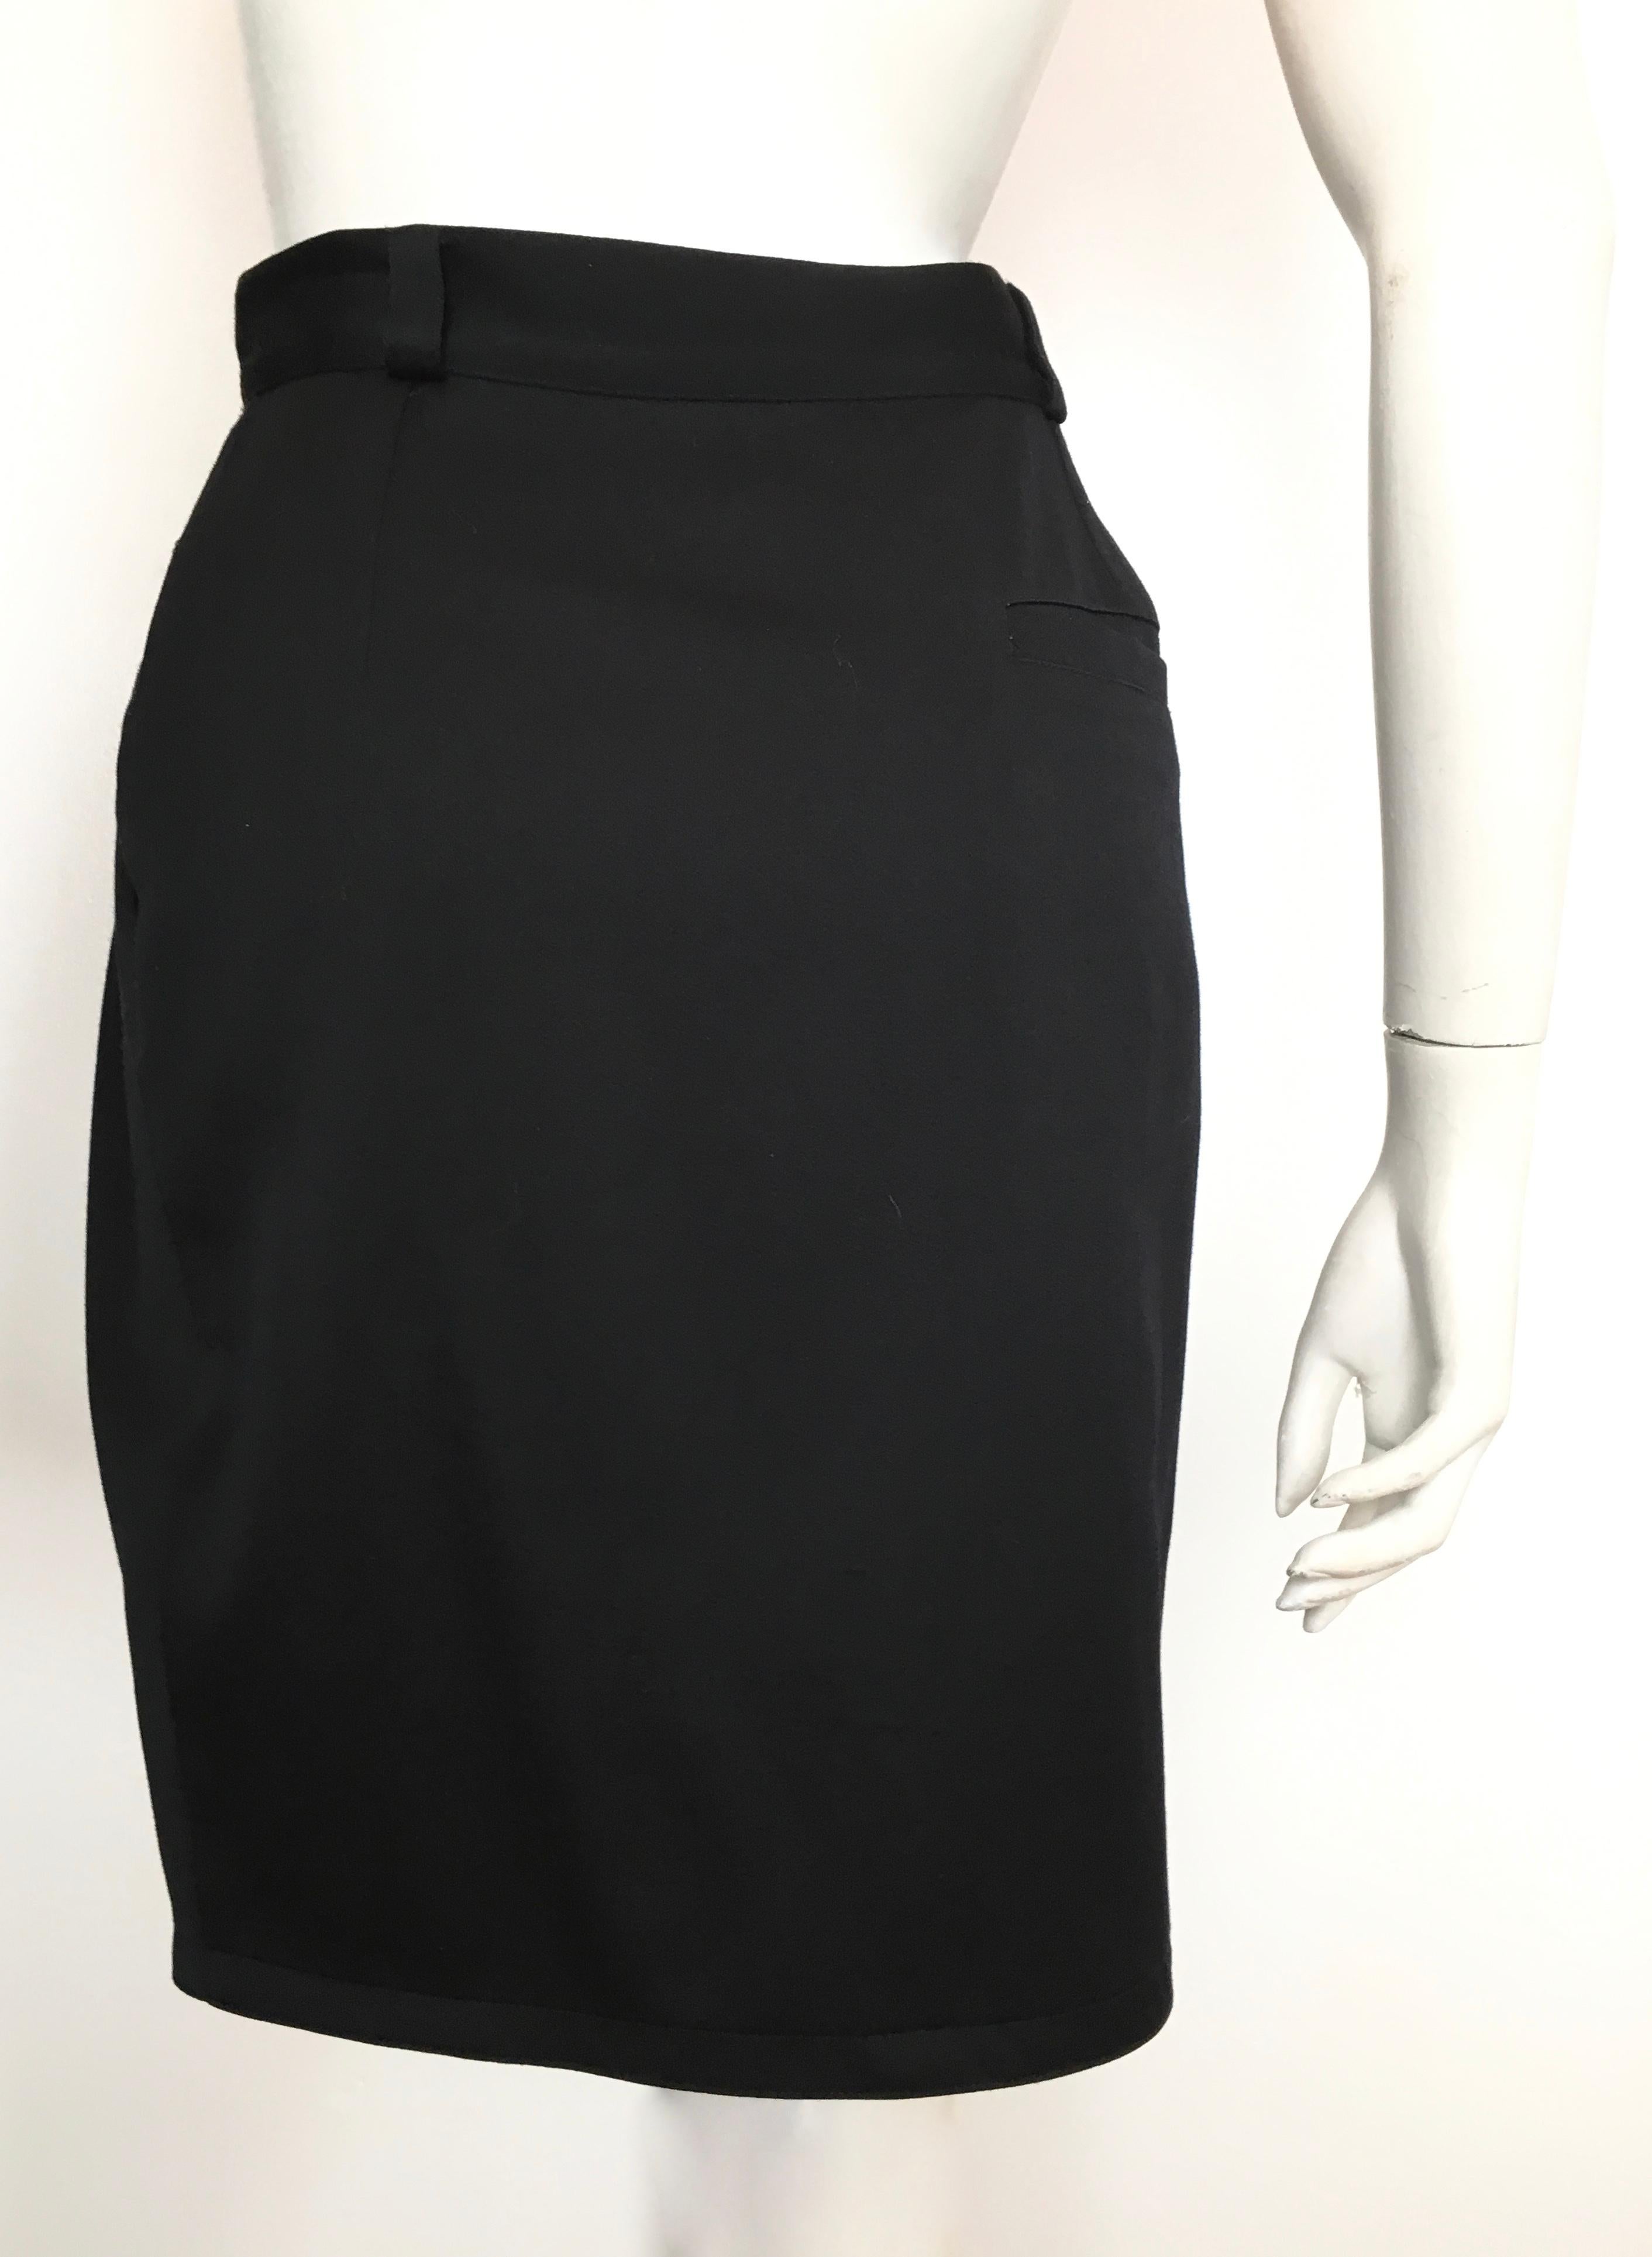 Gianni Versace 1980s Black Wool Skirt with Pockets Size 4.  For Sale 1